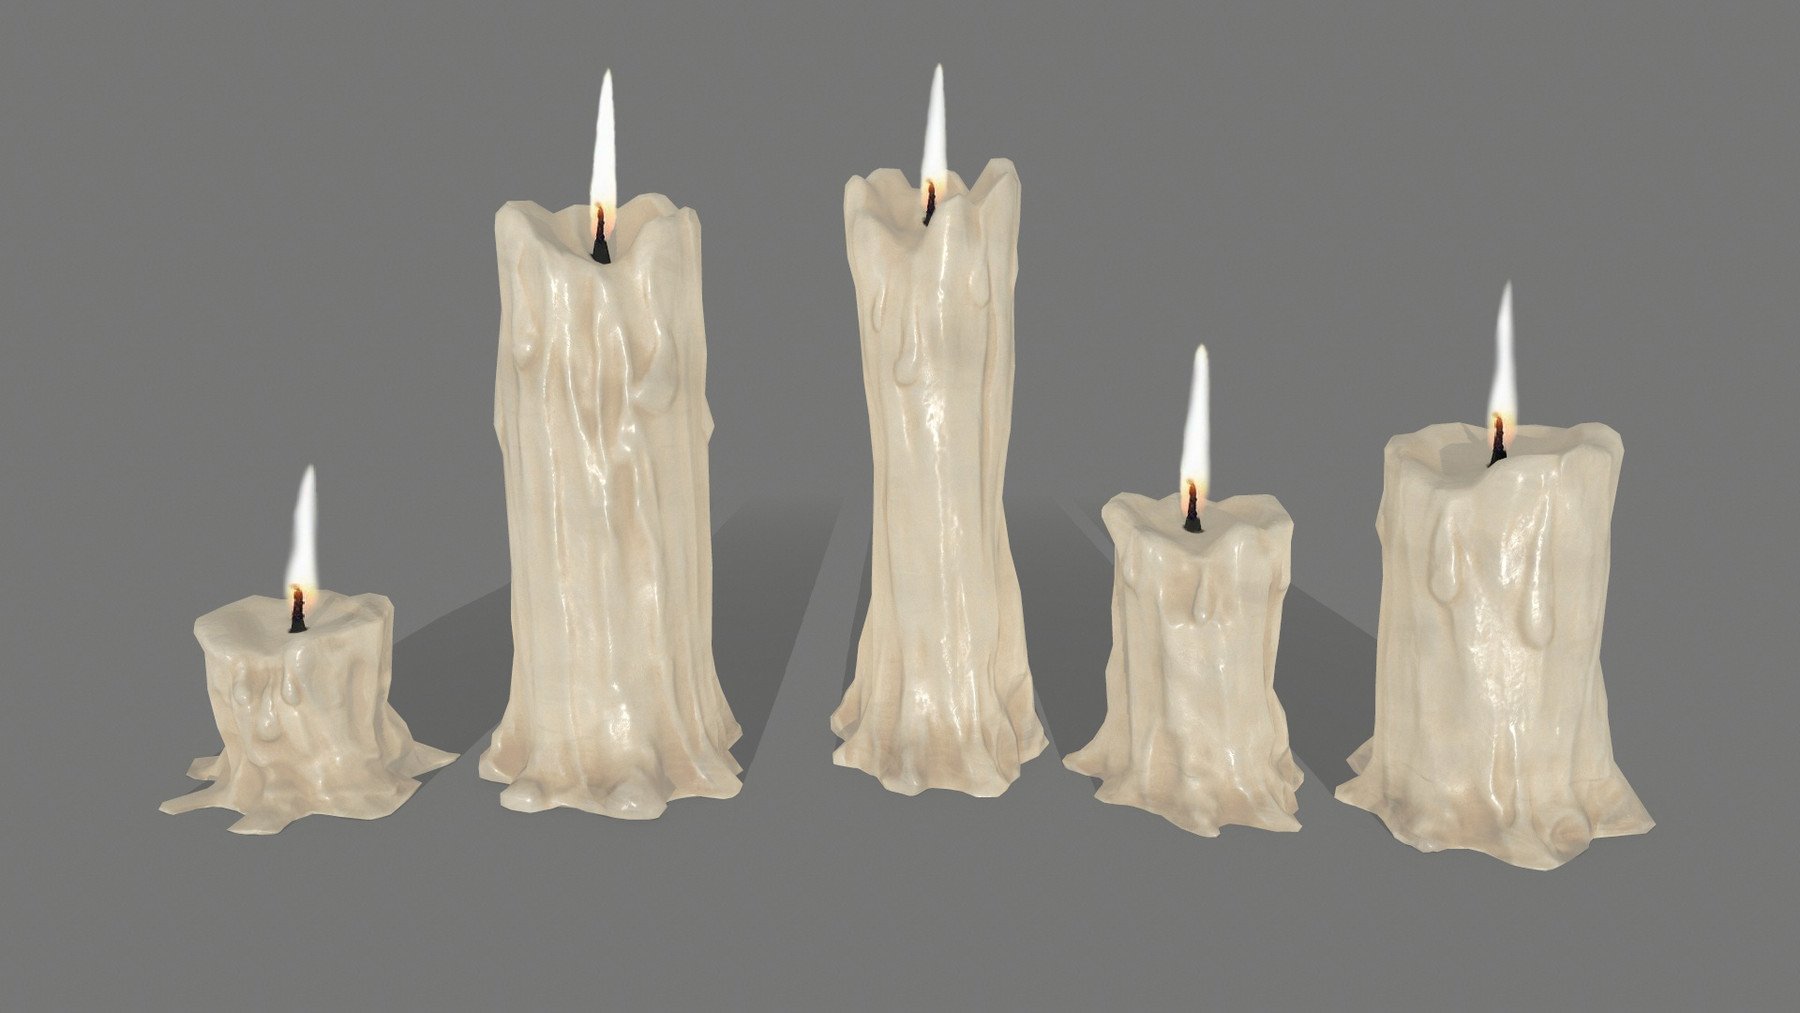 382 vertices. candle_3. 